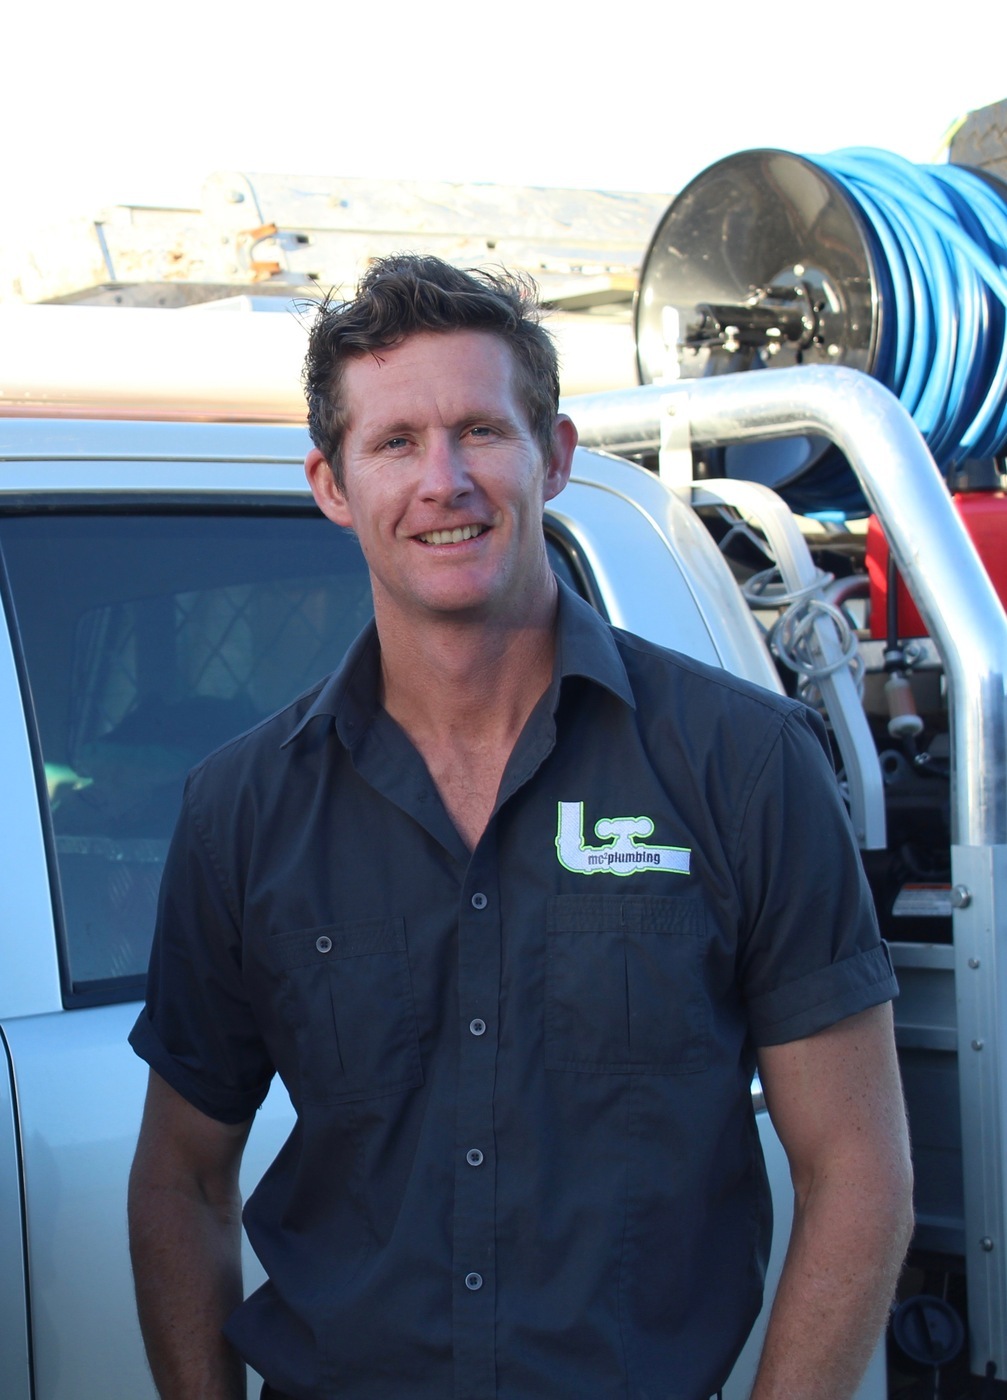 MC2 Plumbing was established in 2013 with the intention of filling a gap in the plumbing industry for clean, tidy and professional plumbers in Perth